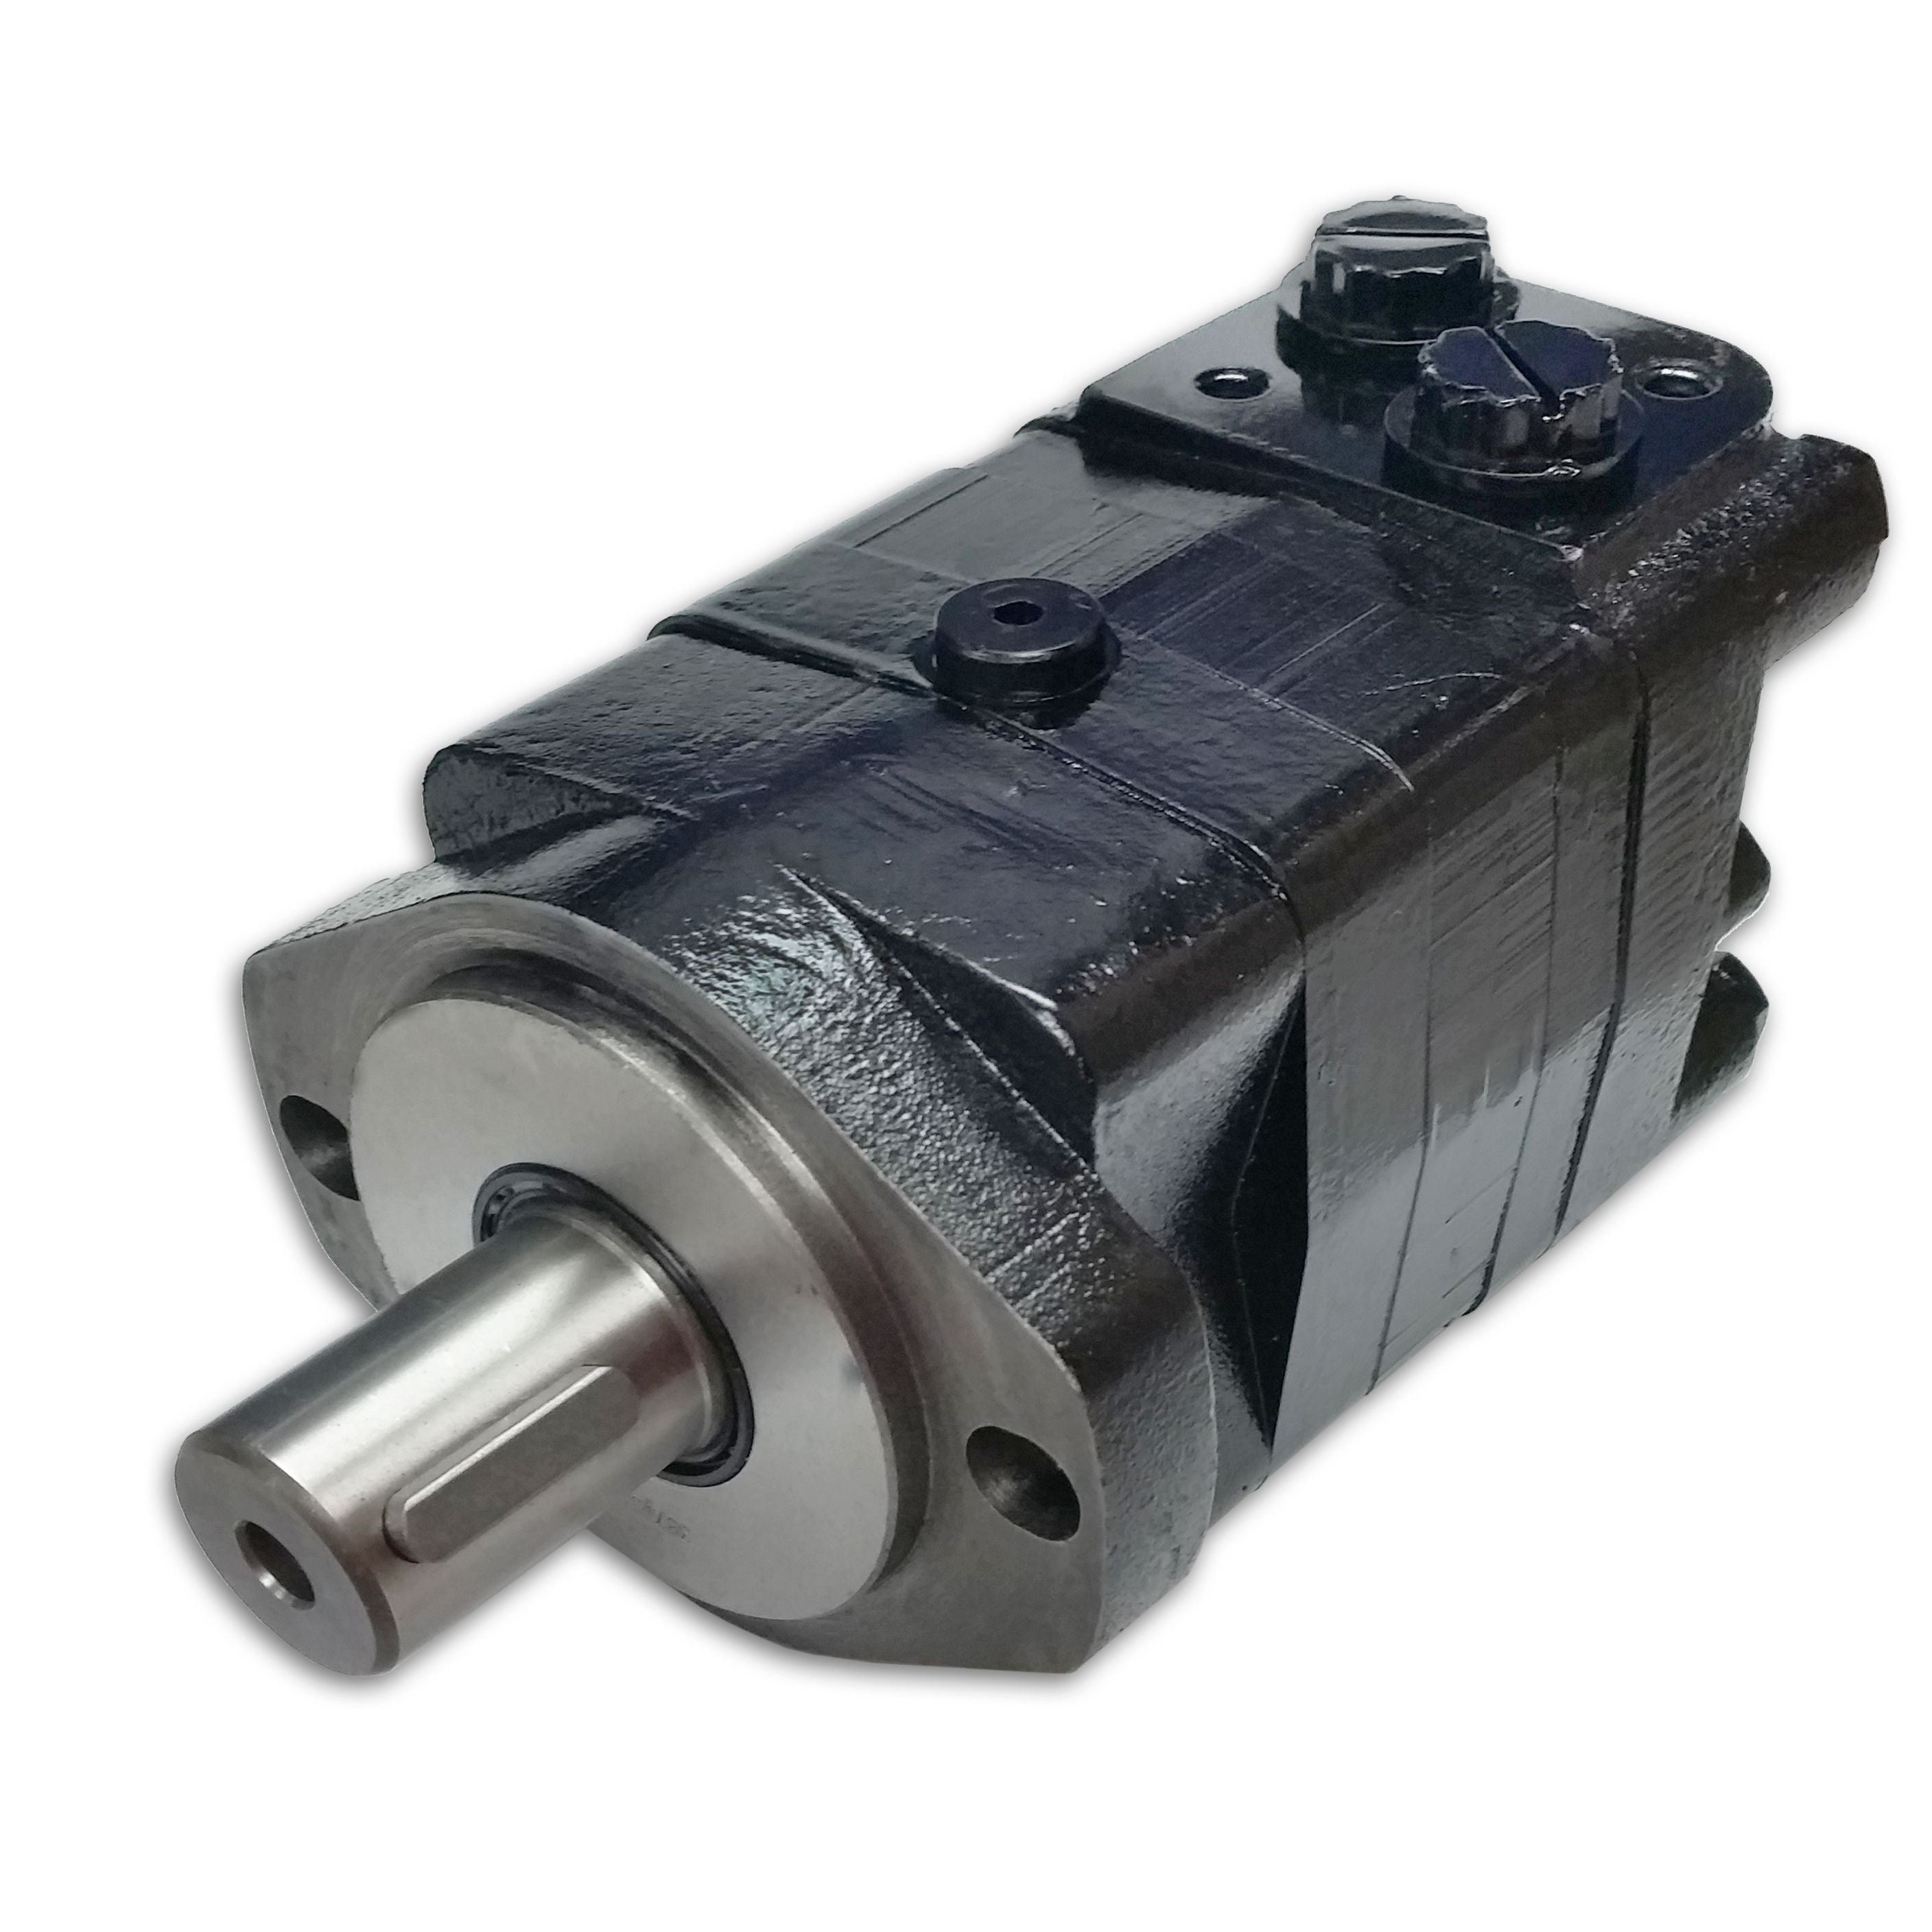 BMSY-250-E2-G-S : Dynamic LSHT Motor, 243cc, 300RPM, 6265in-lb, 2900psi Differential, 19.81GPM, SAE A 2-Bolt Mount, 1.25" Bore x 5/16" Key Shaft, Side Ported, #10 SAE (5/8")